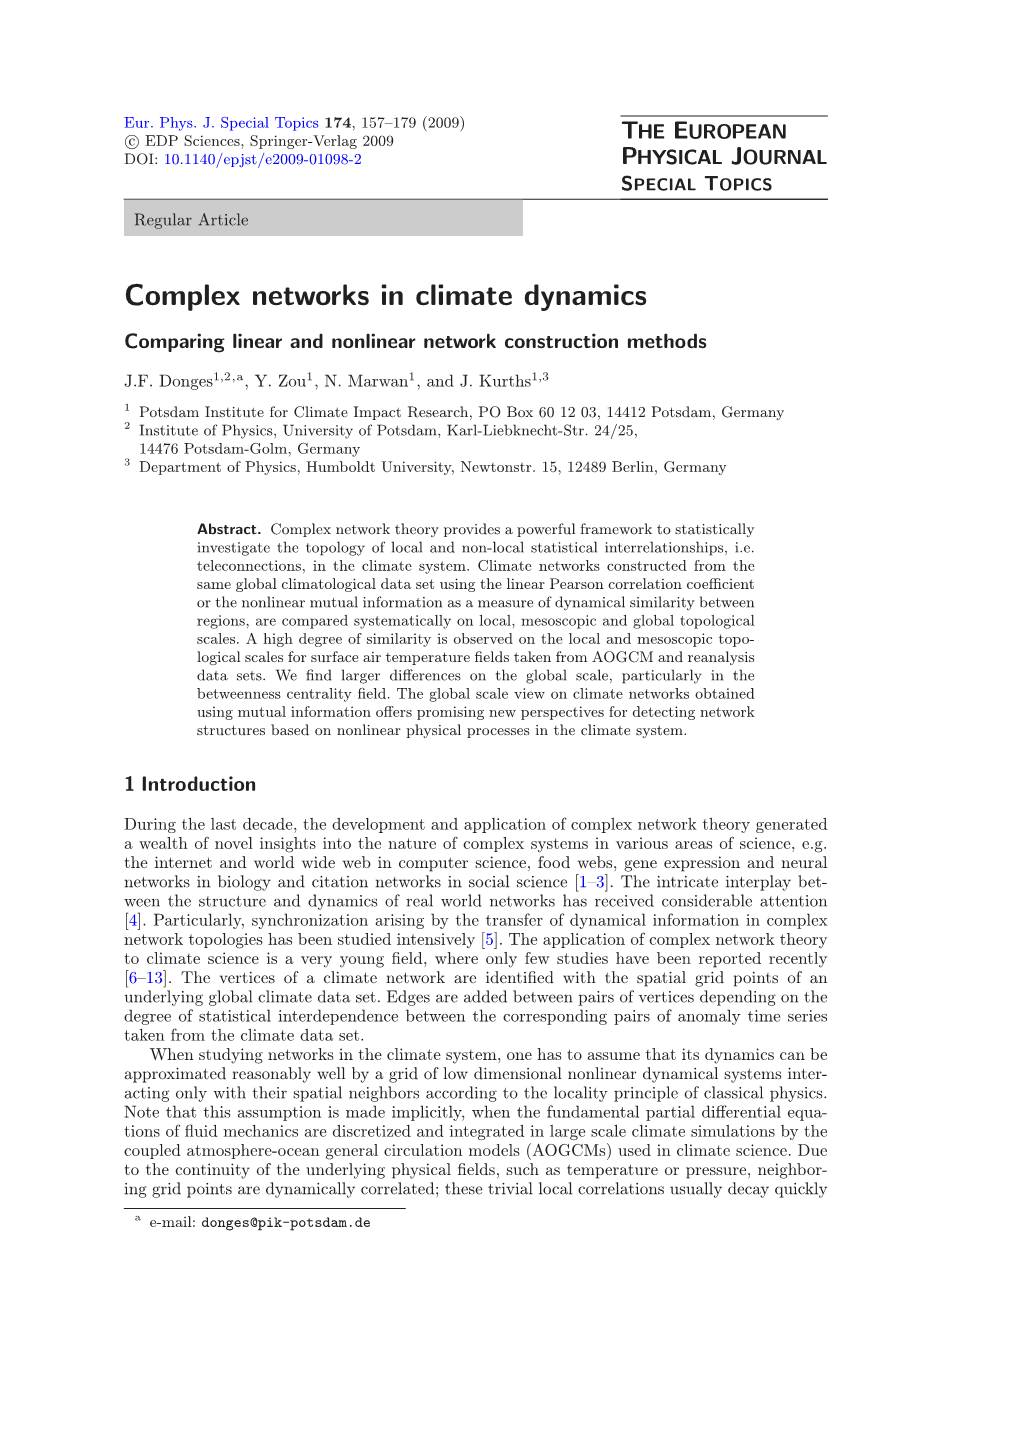 Complex Networks in Climate Dynamics